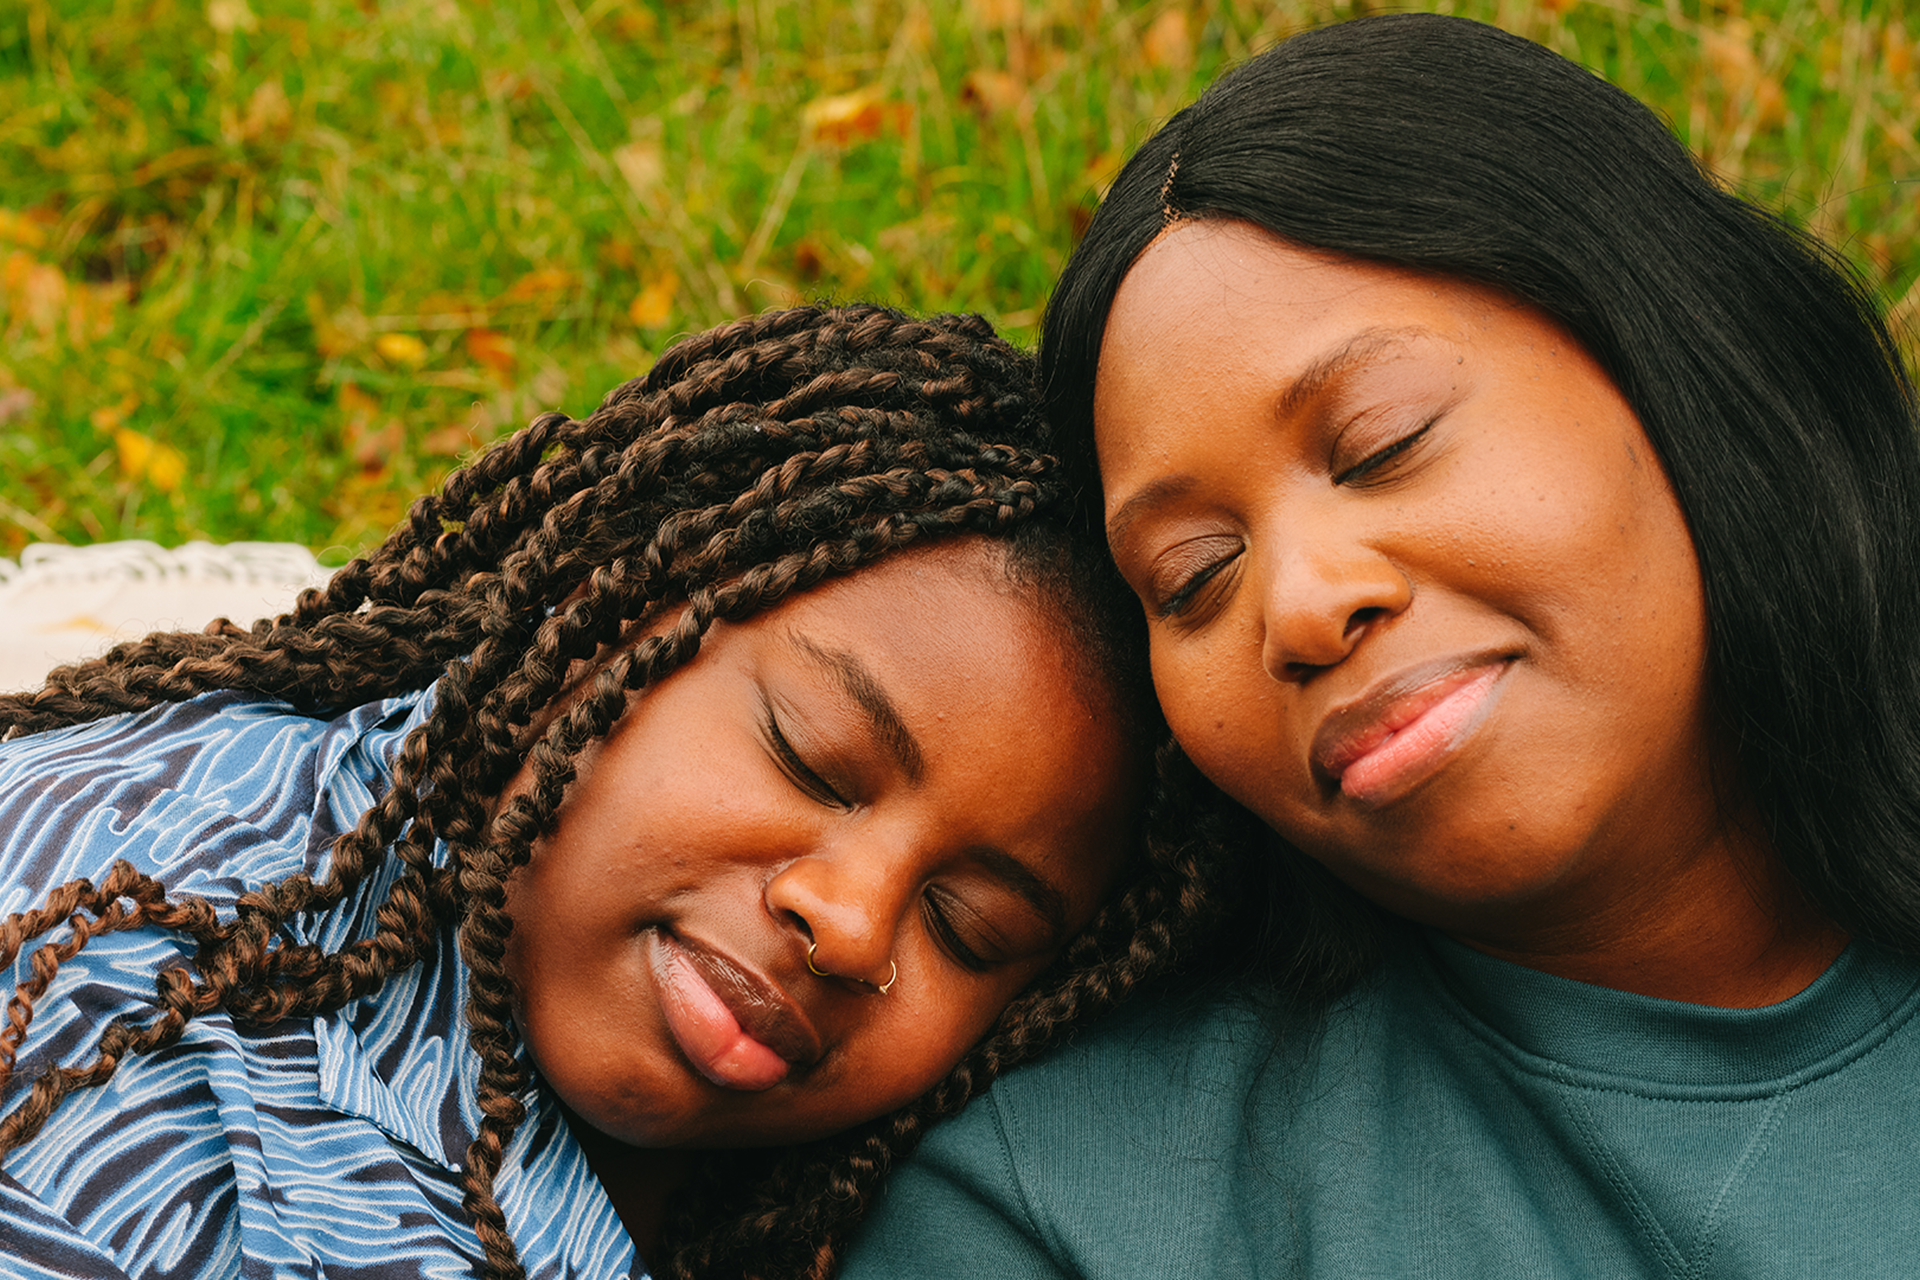 A young Black woman and an older Black woman leaning their heads on each other's shoulders and smiling. Their eyes are closed.